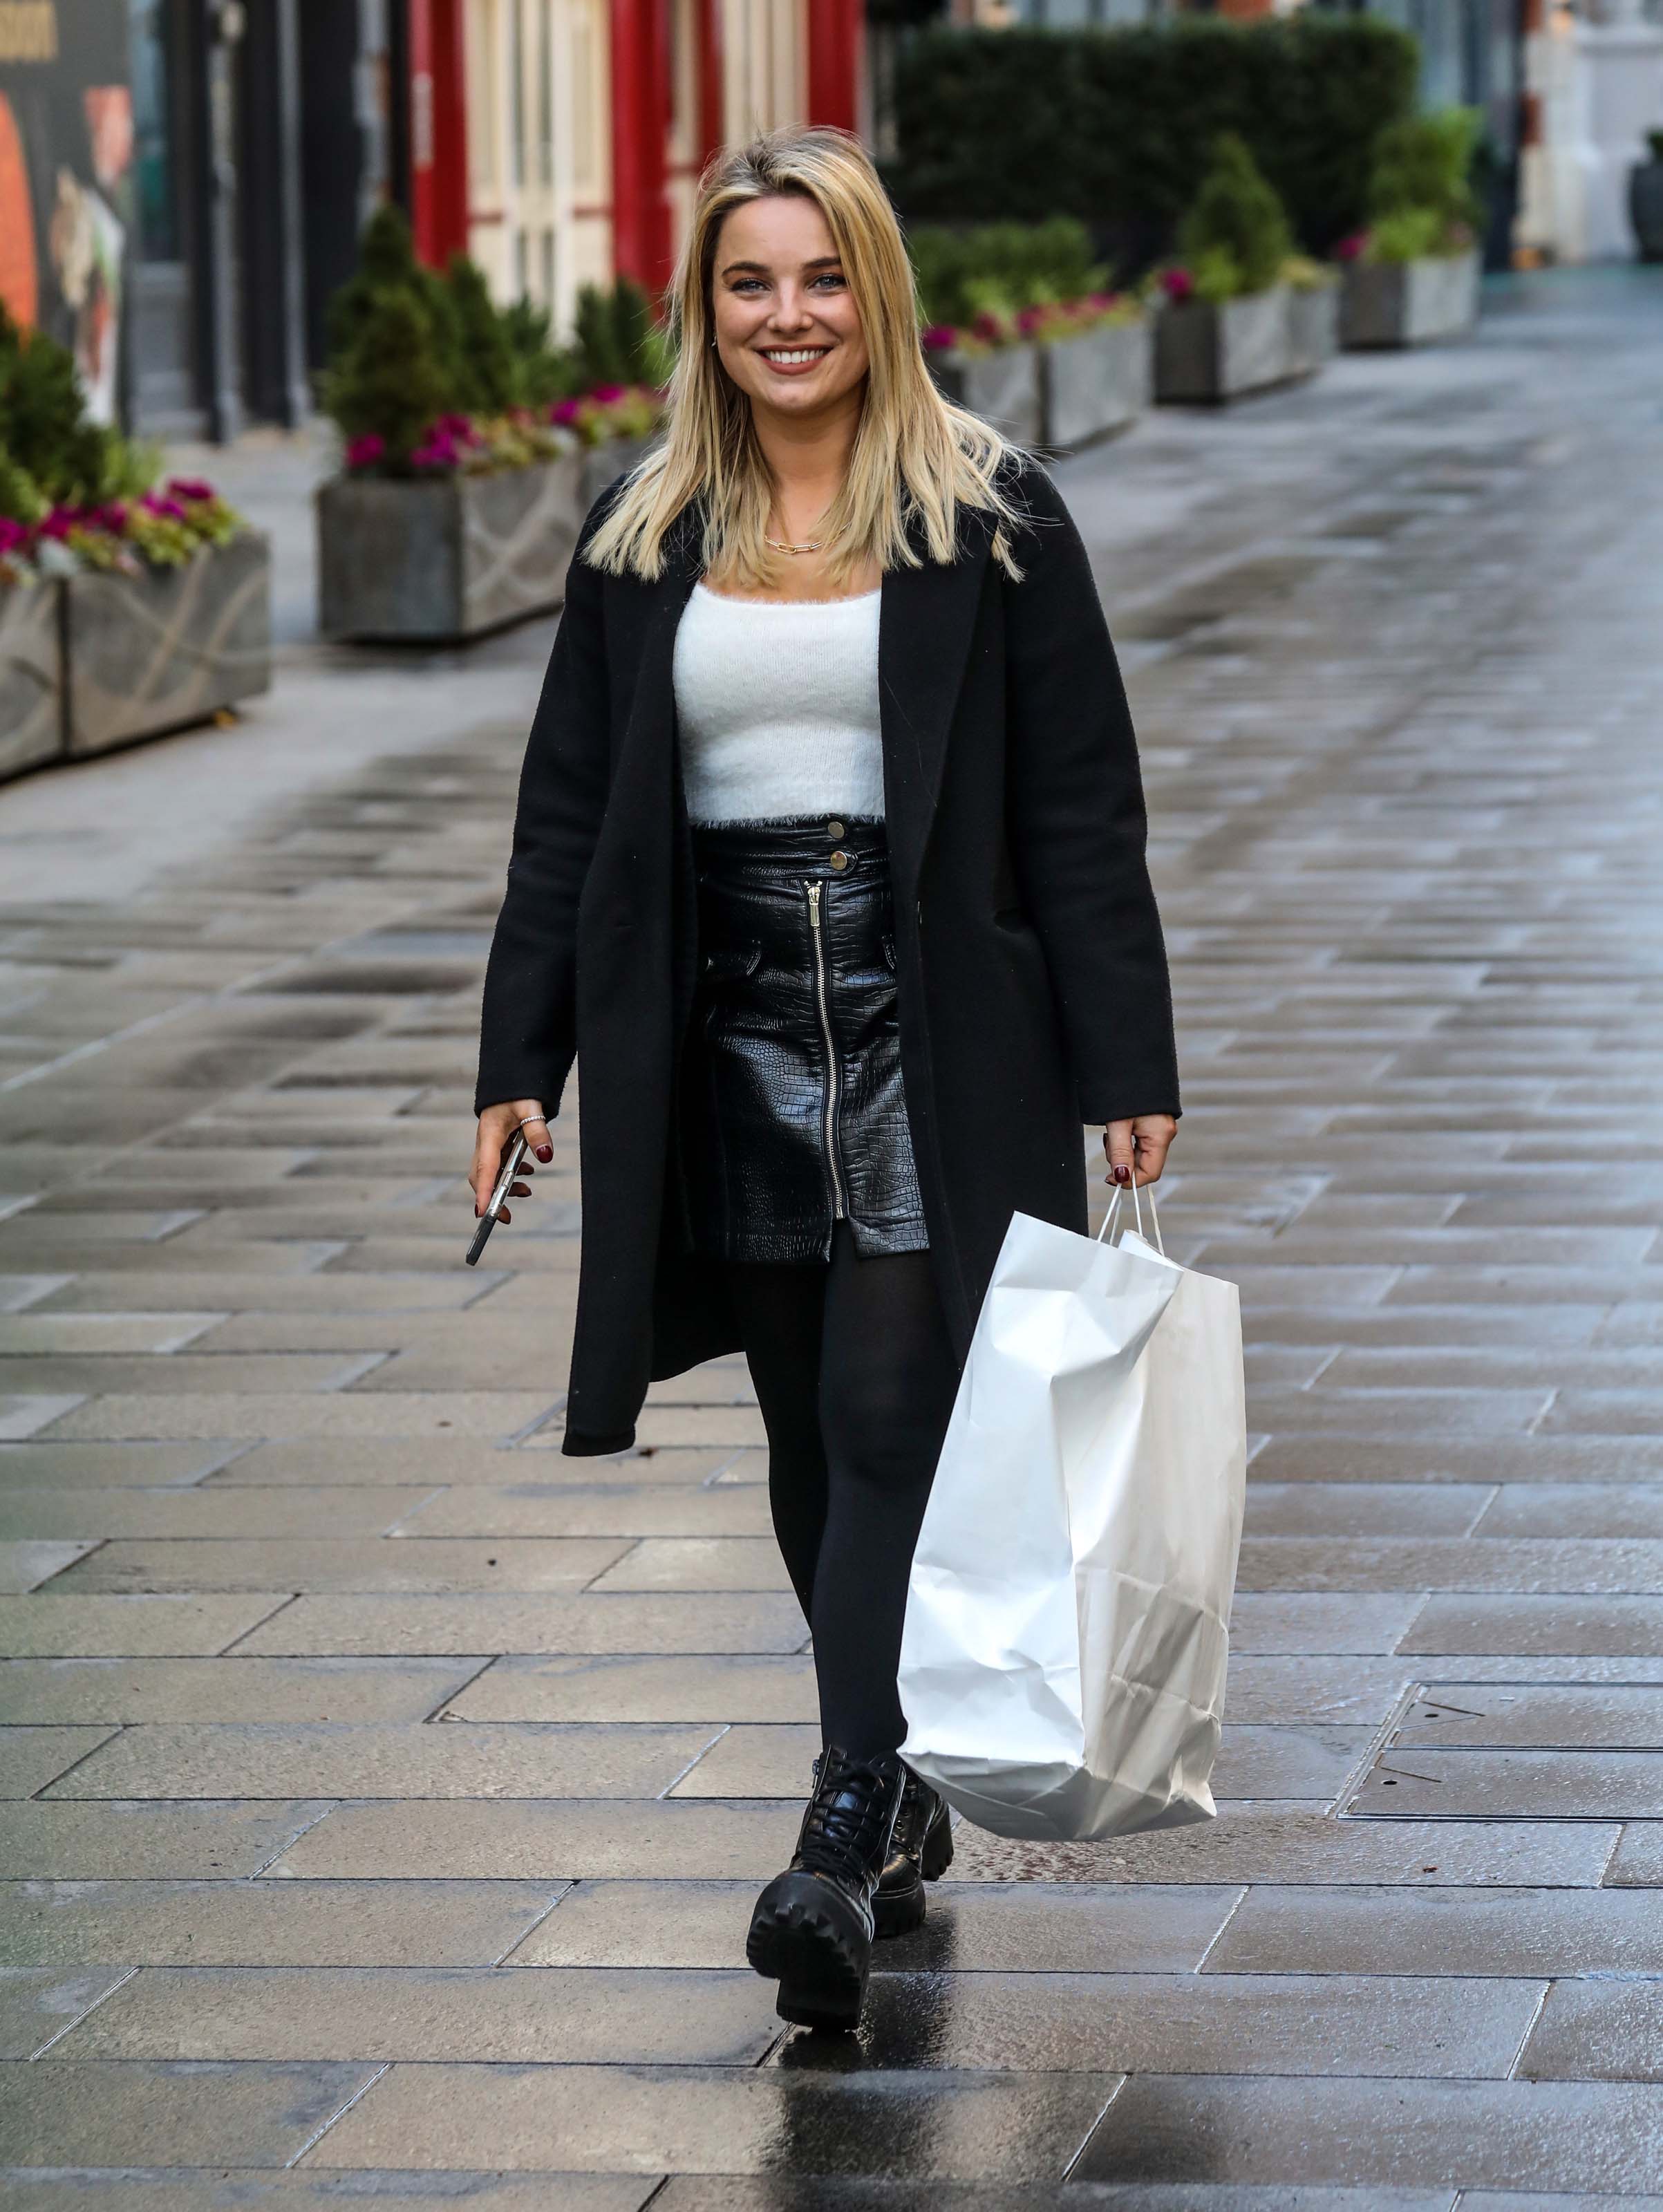 Sian Welby seen at Global Radio Studios in London’s Leicester Square